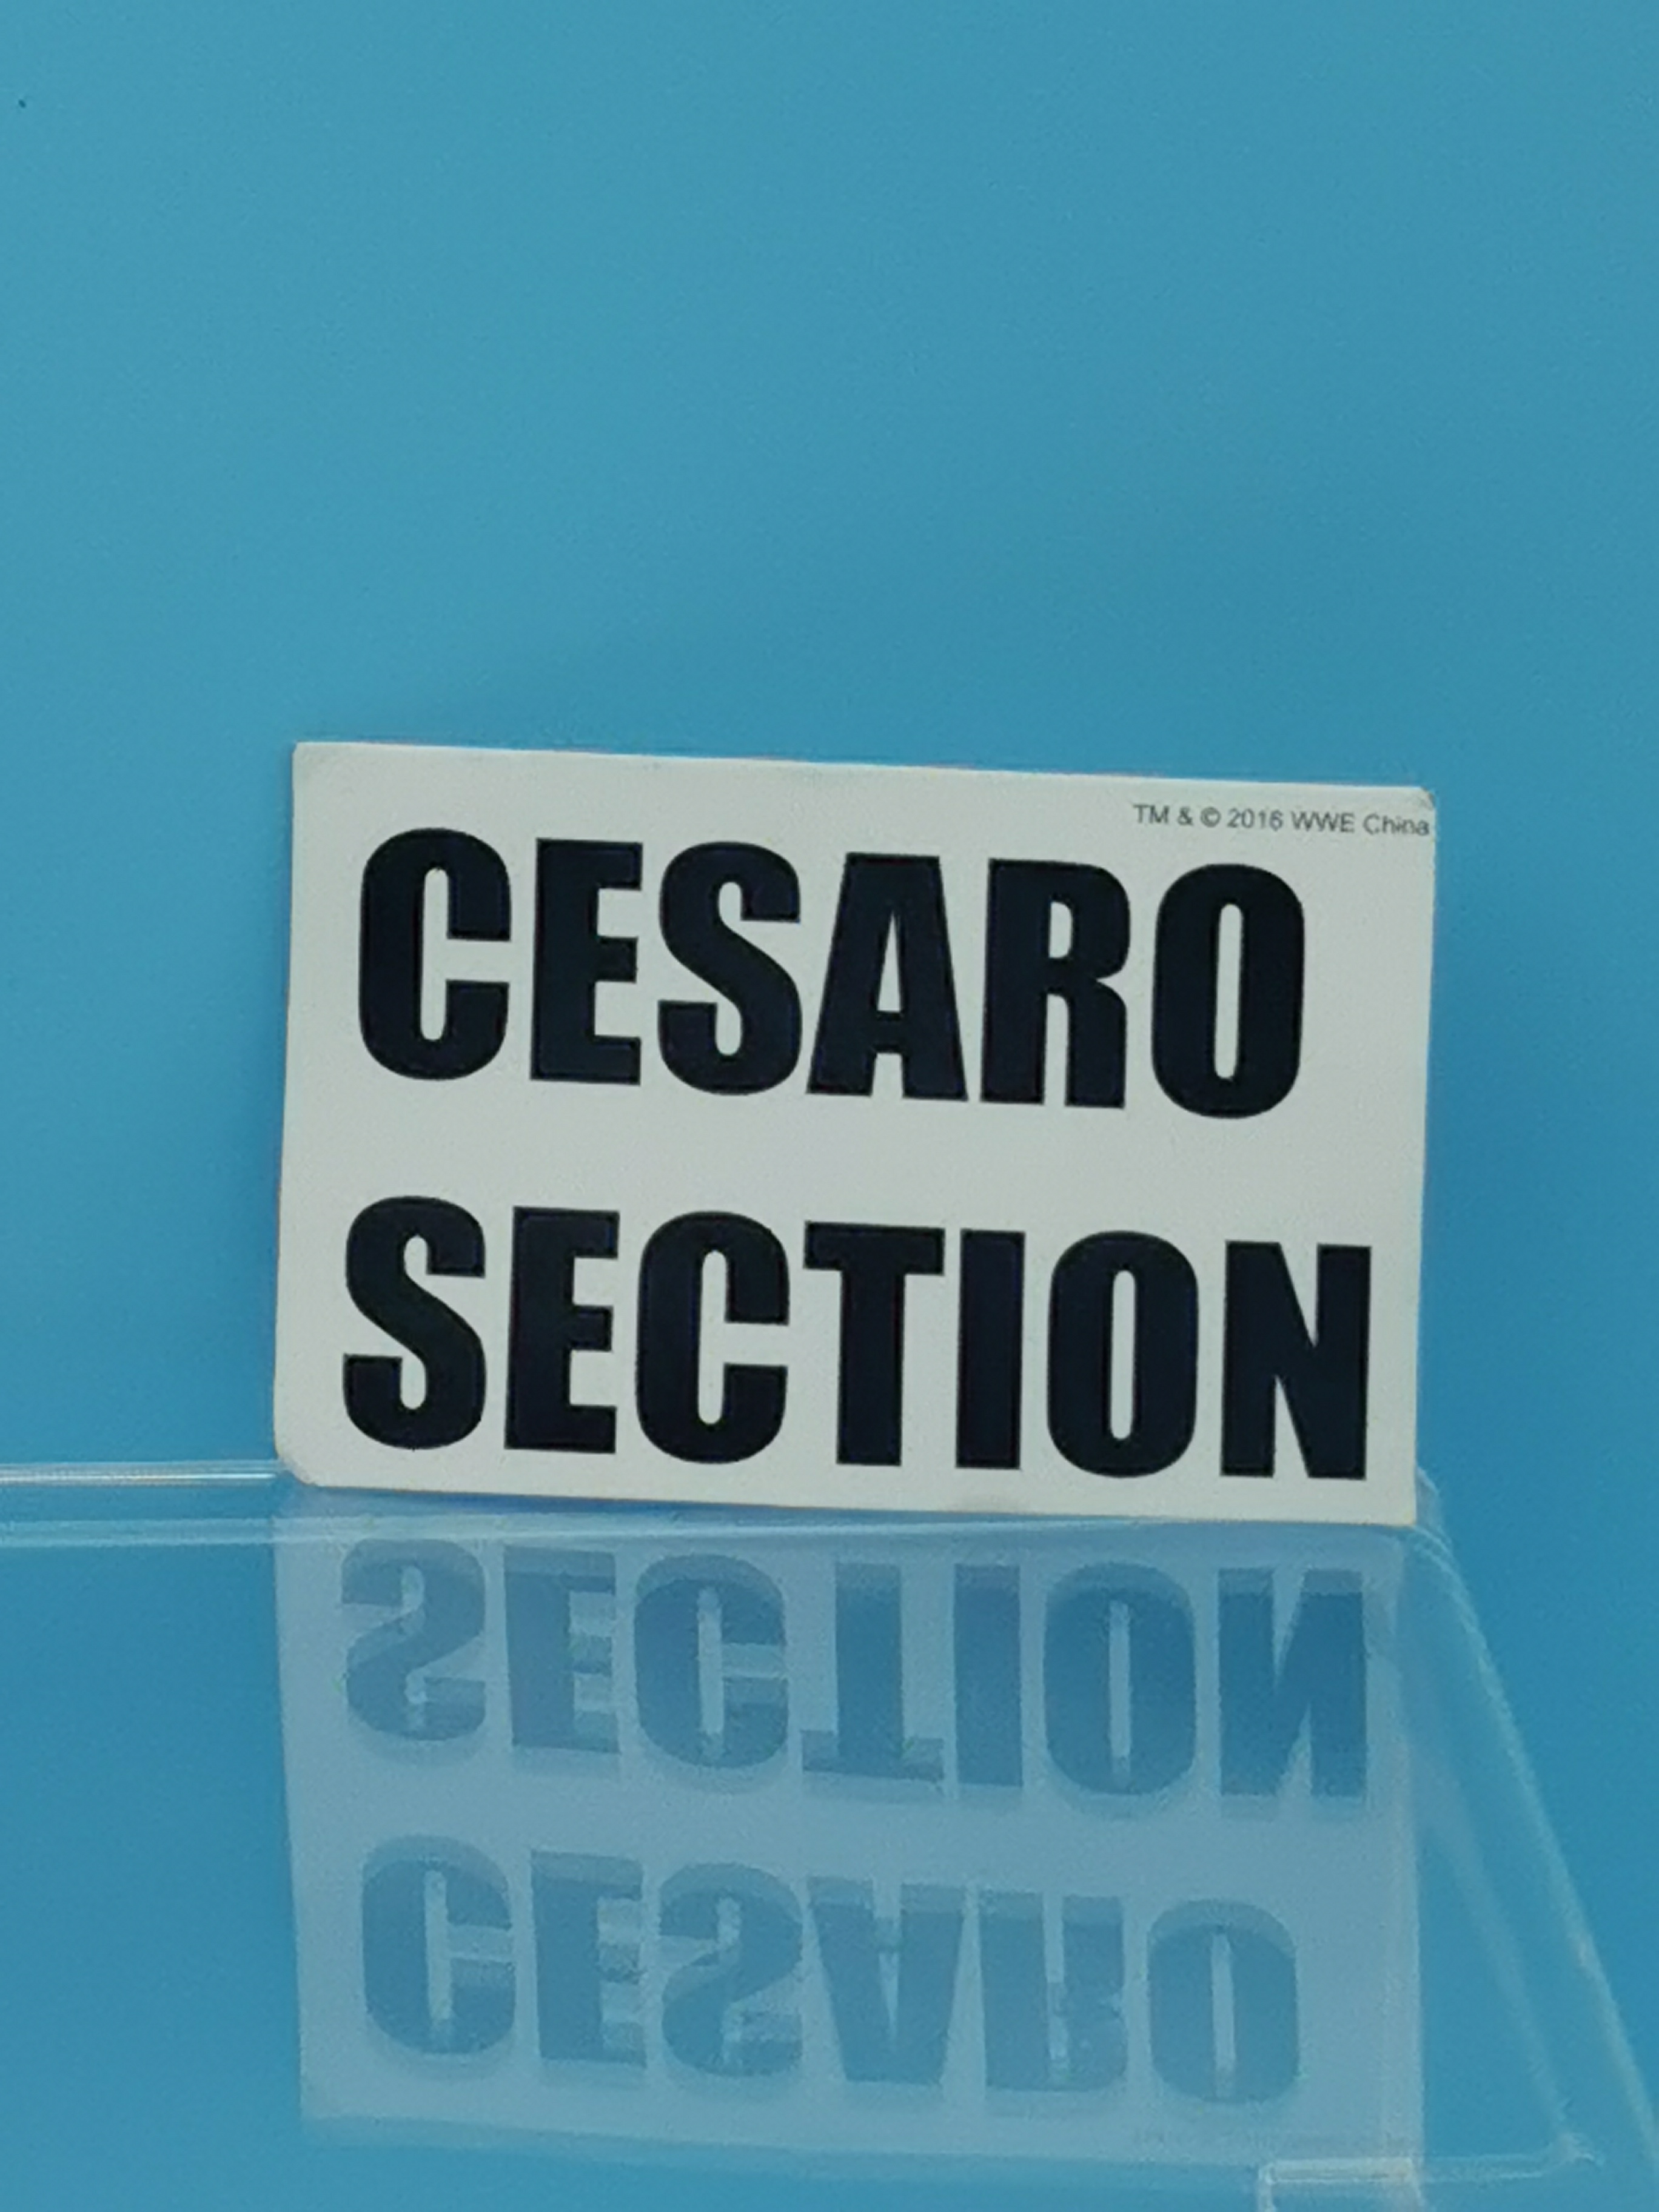 WWE Mattel Accessories Cesaro Section Sign